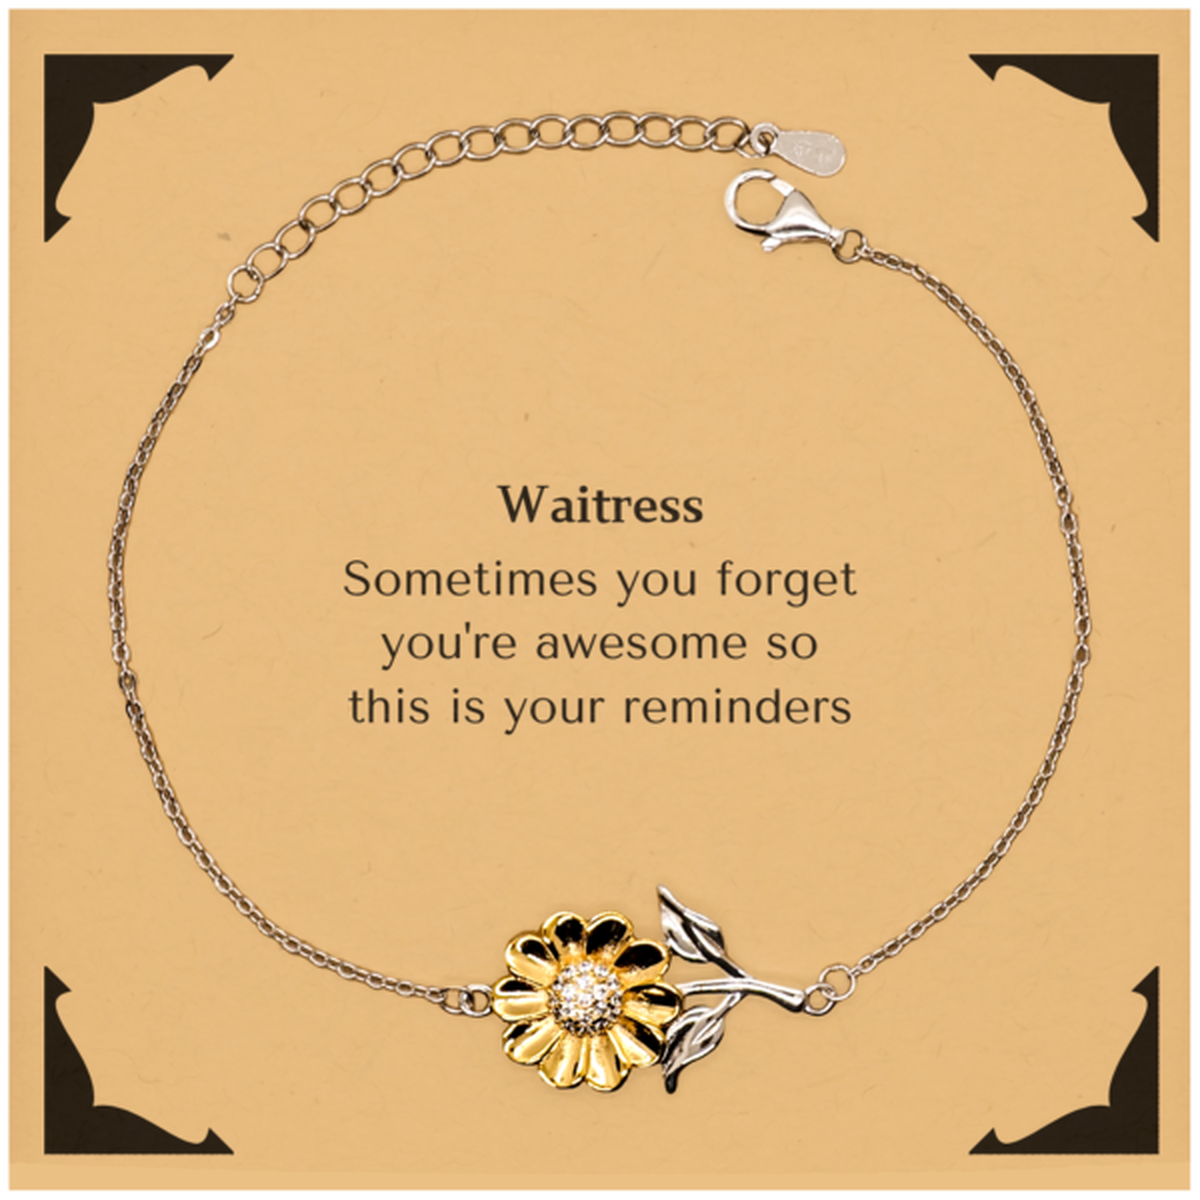 Sentimental Waitress Sunflower Bracelet, Waitress Sometimes you forget you're awesome so this is your reminders, Graduation Christmas Birthday Gifts for Waitress, Men, Women, Coworkers